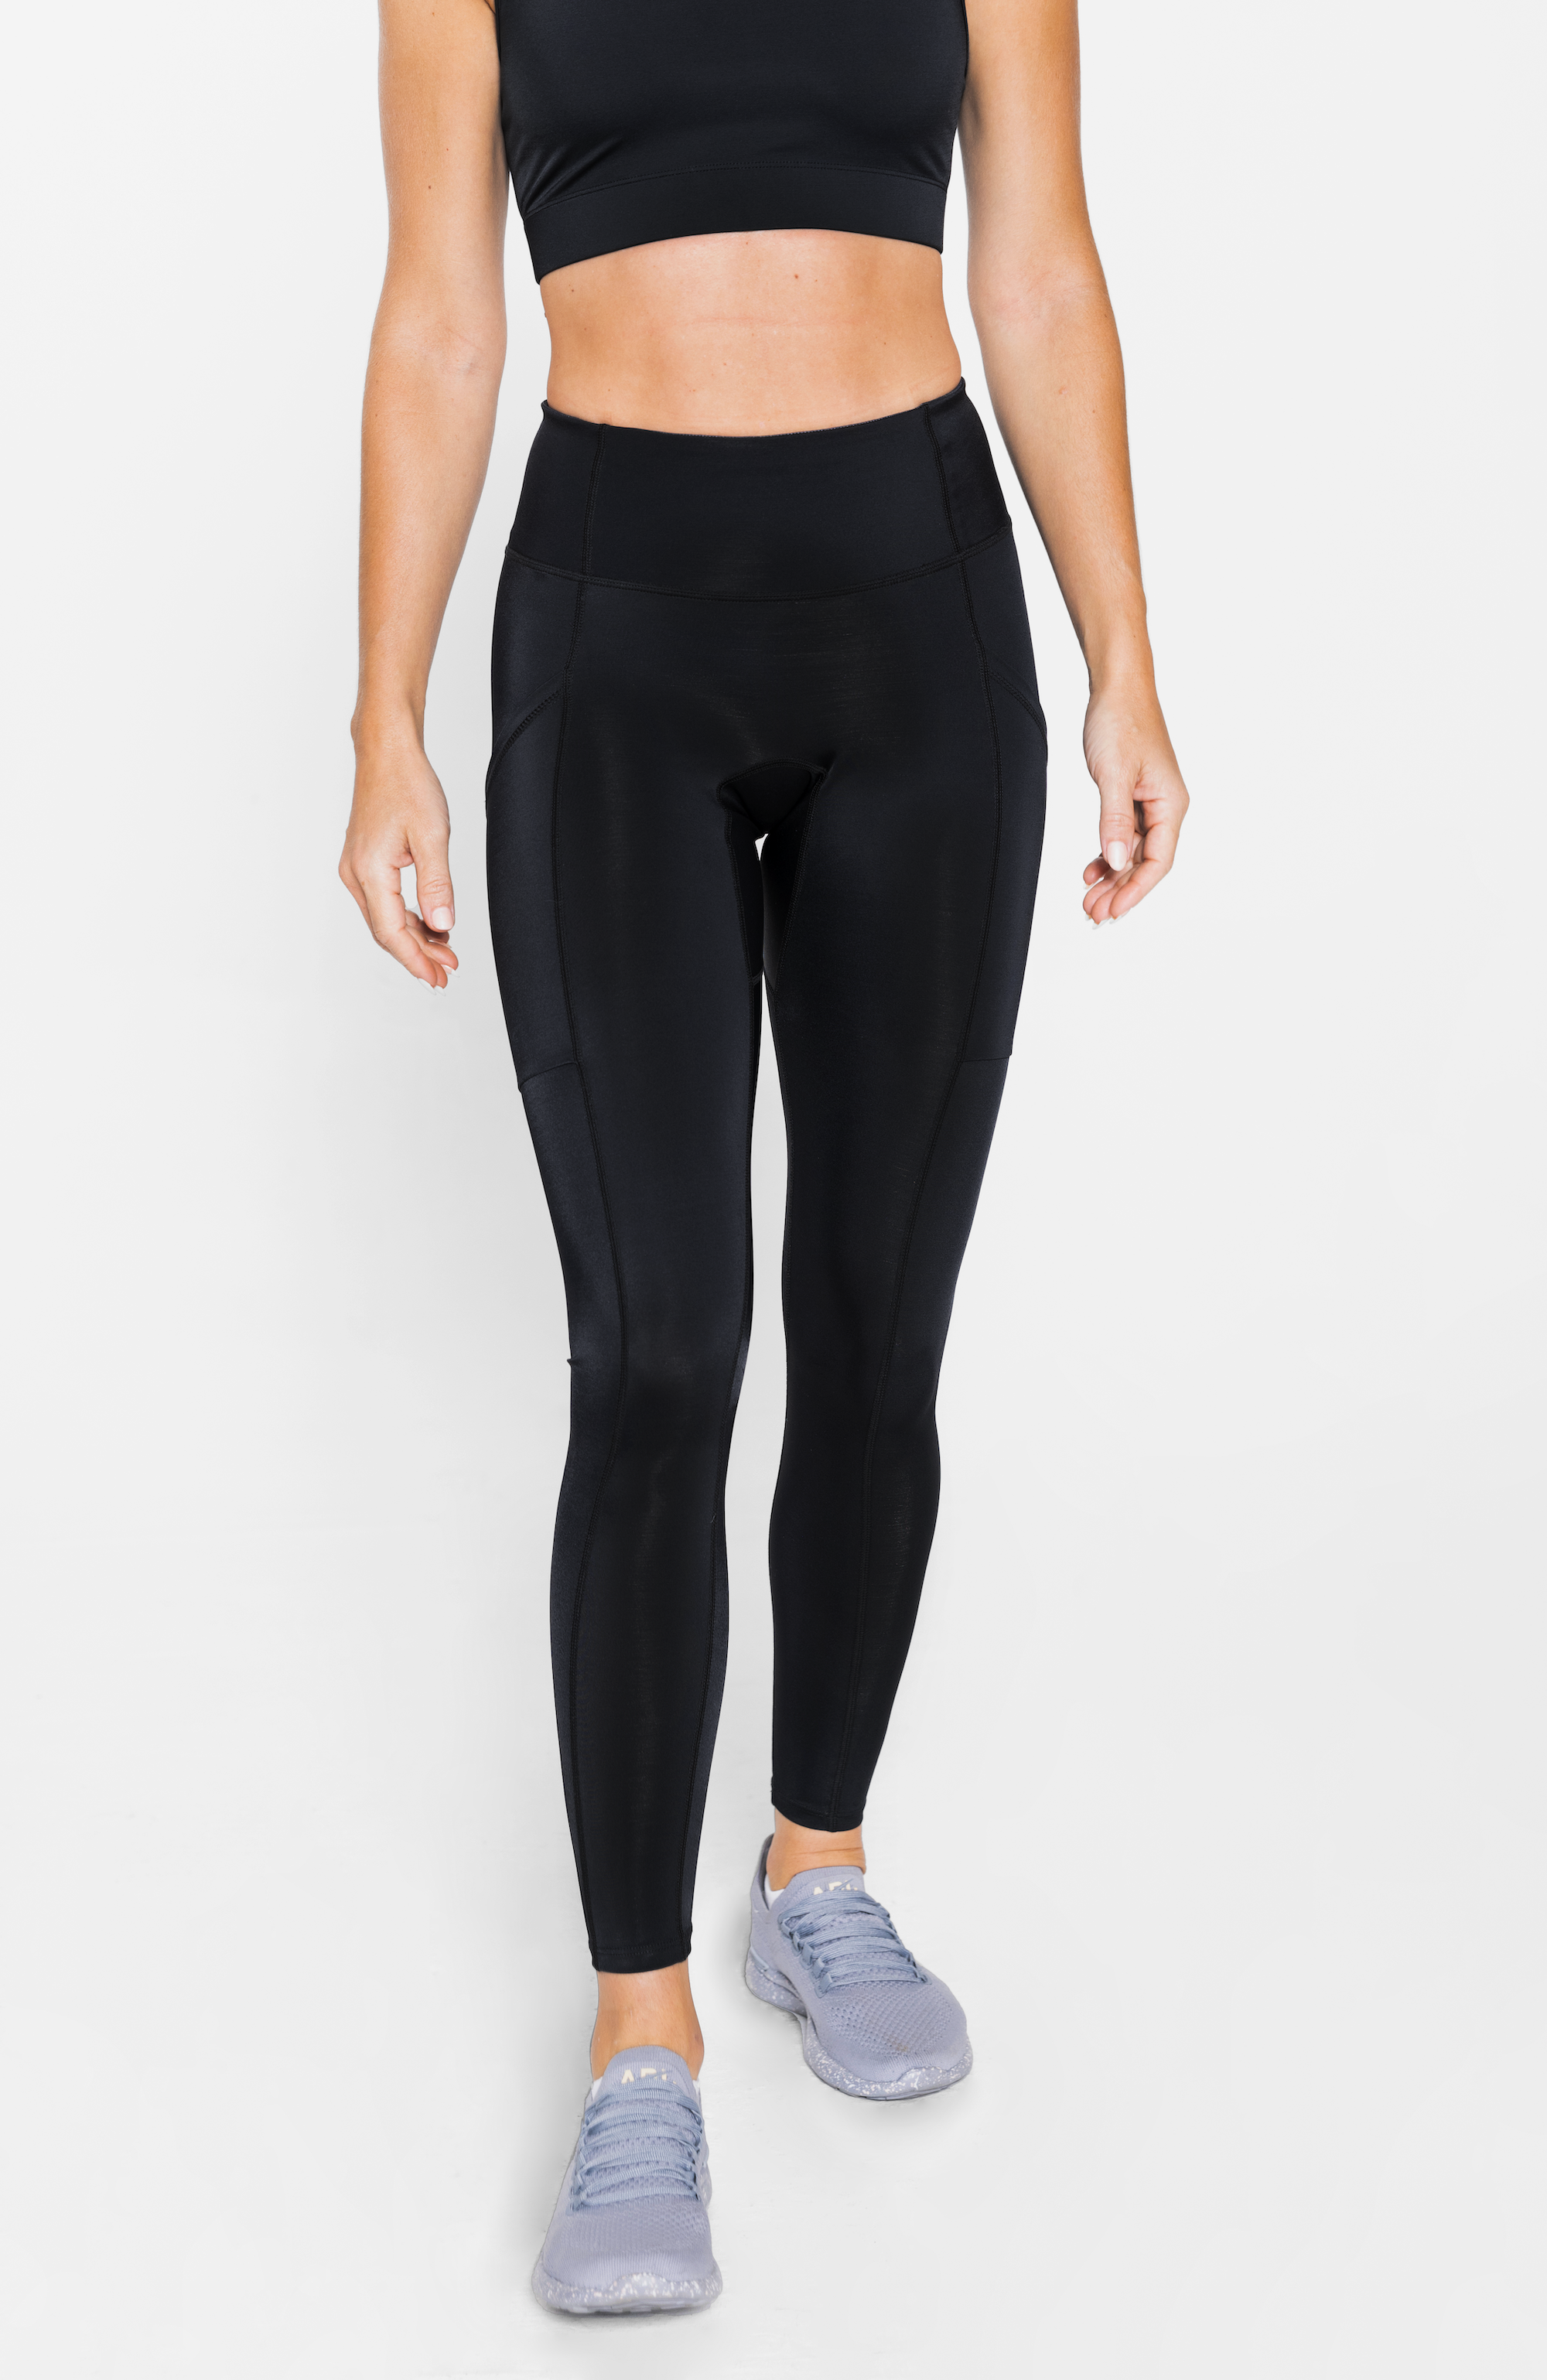 lululemon - Our answer to these frigid temps—the return of the